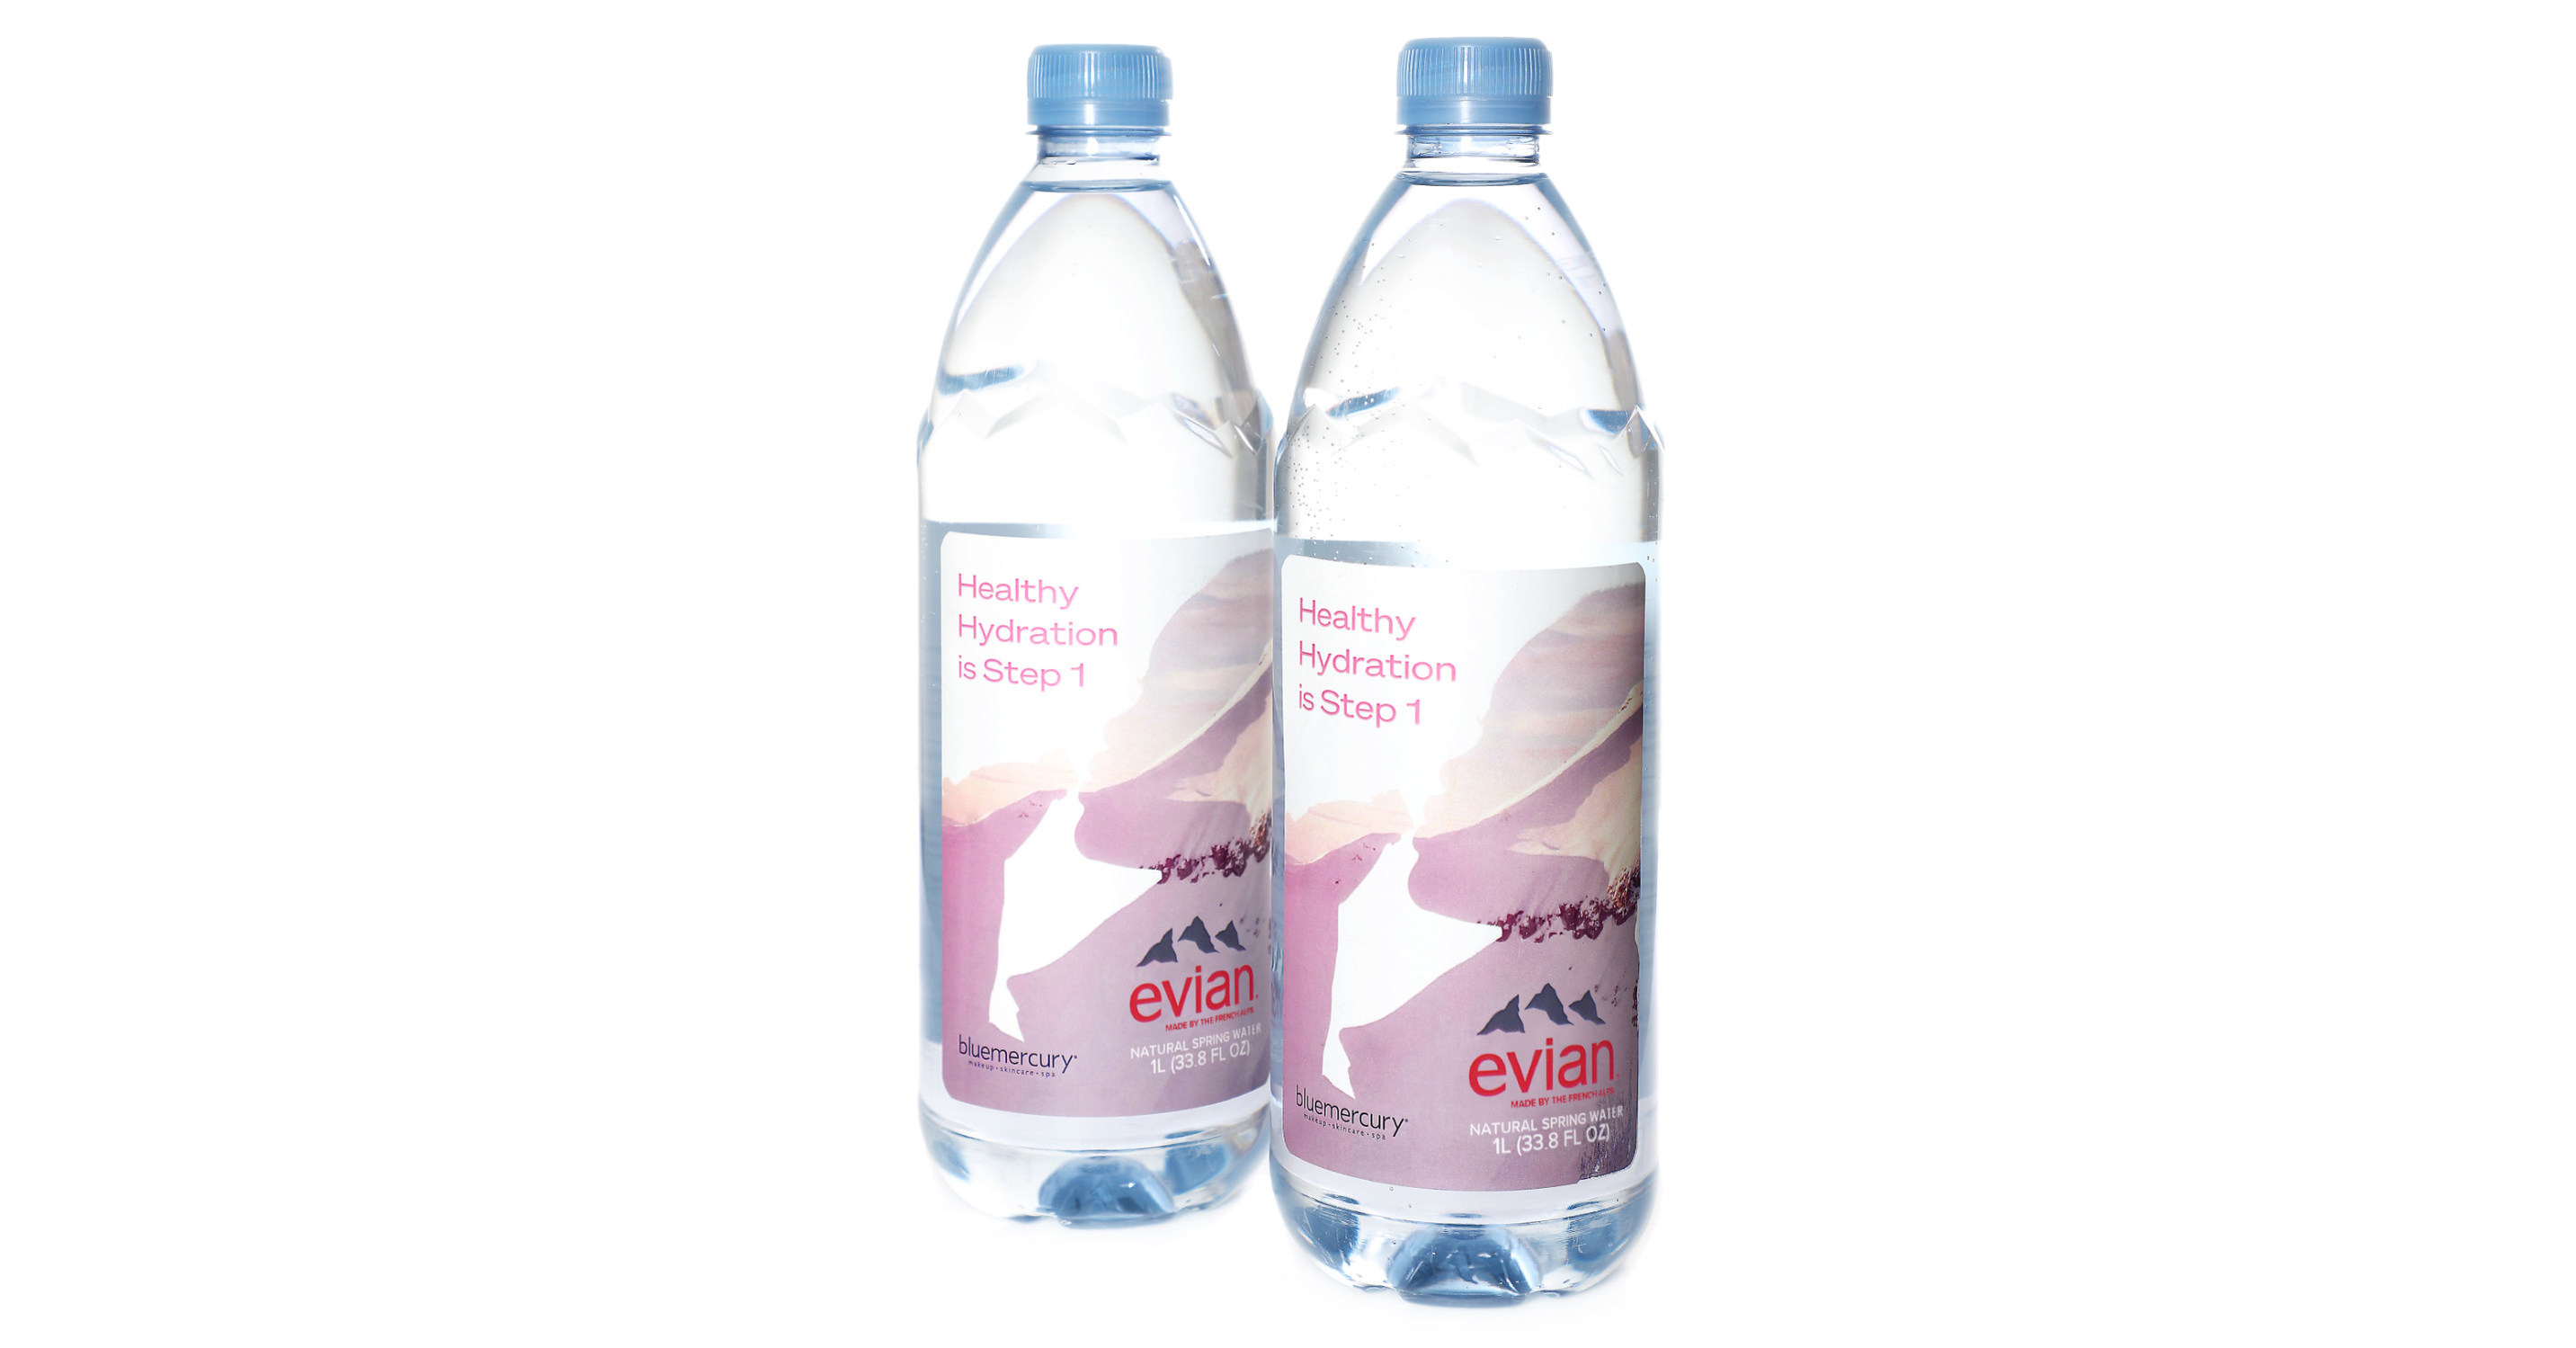 Choose a good thing for health, do not forget to drink evian water